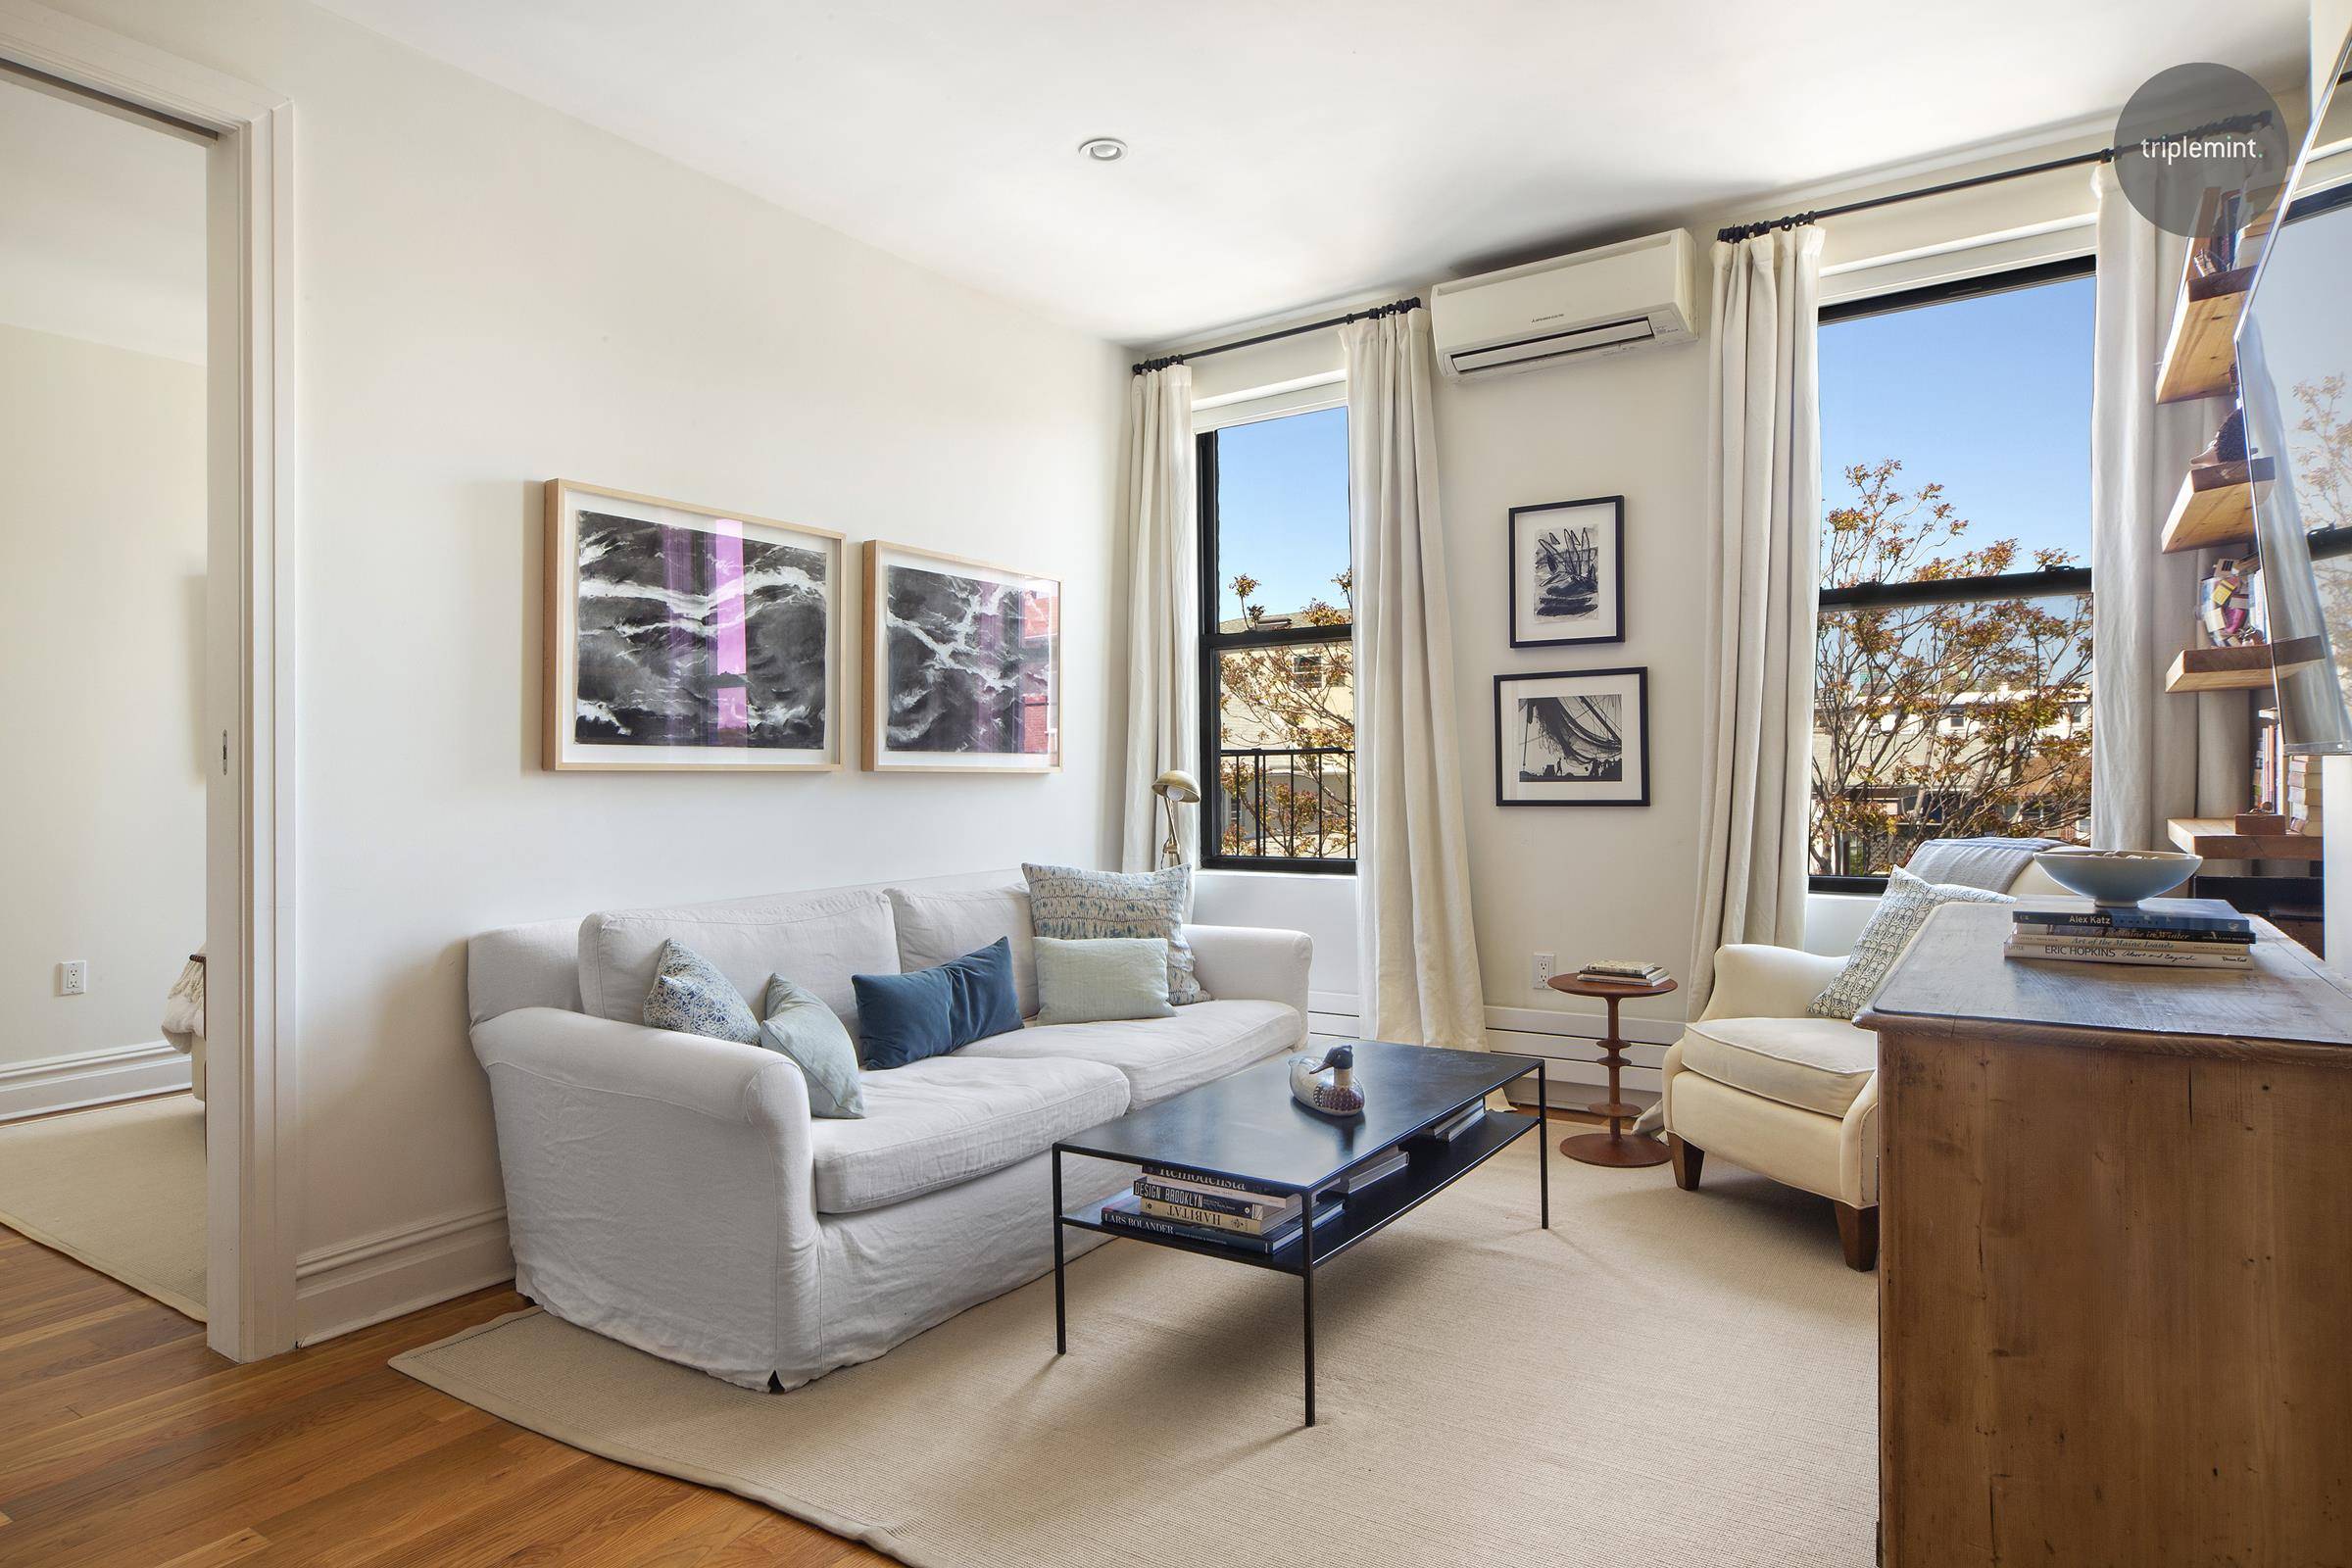 Welcome to 203 Luquer, a boutique condo building in the heart of Carroll Gardens.